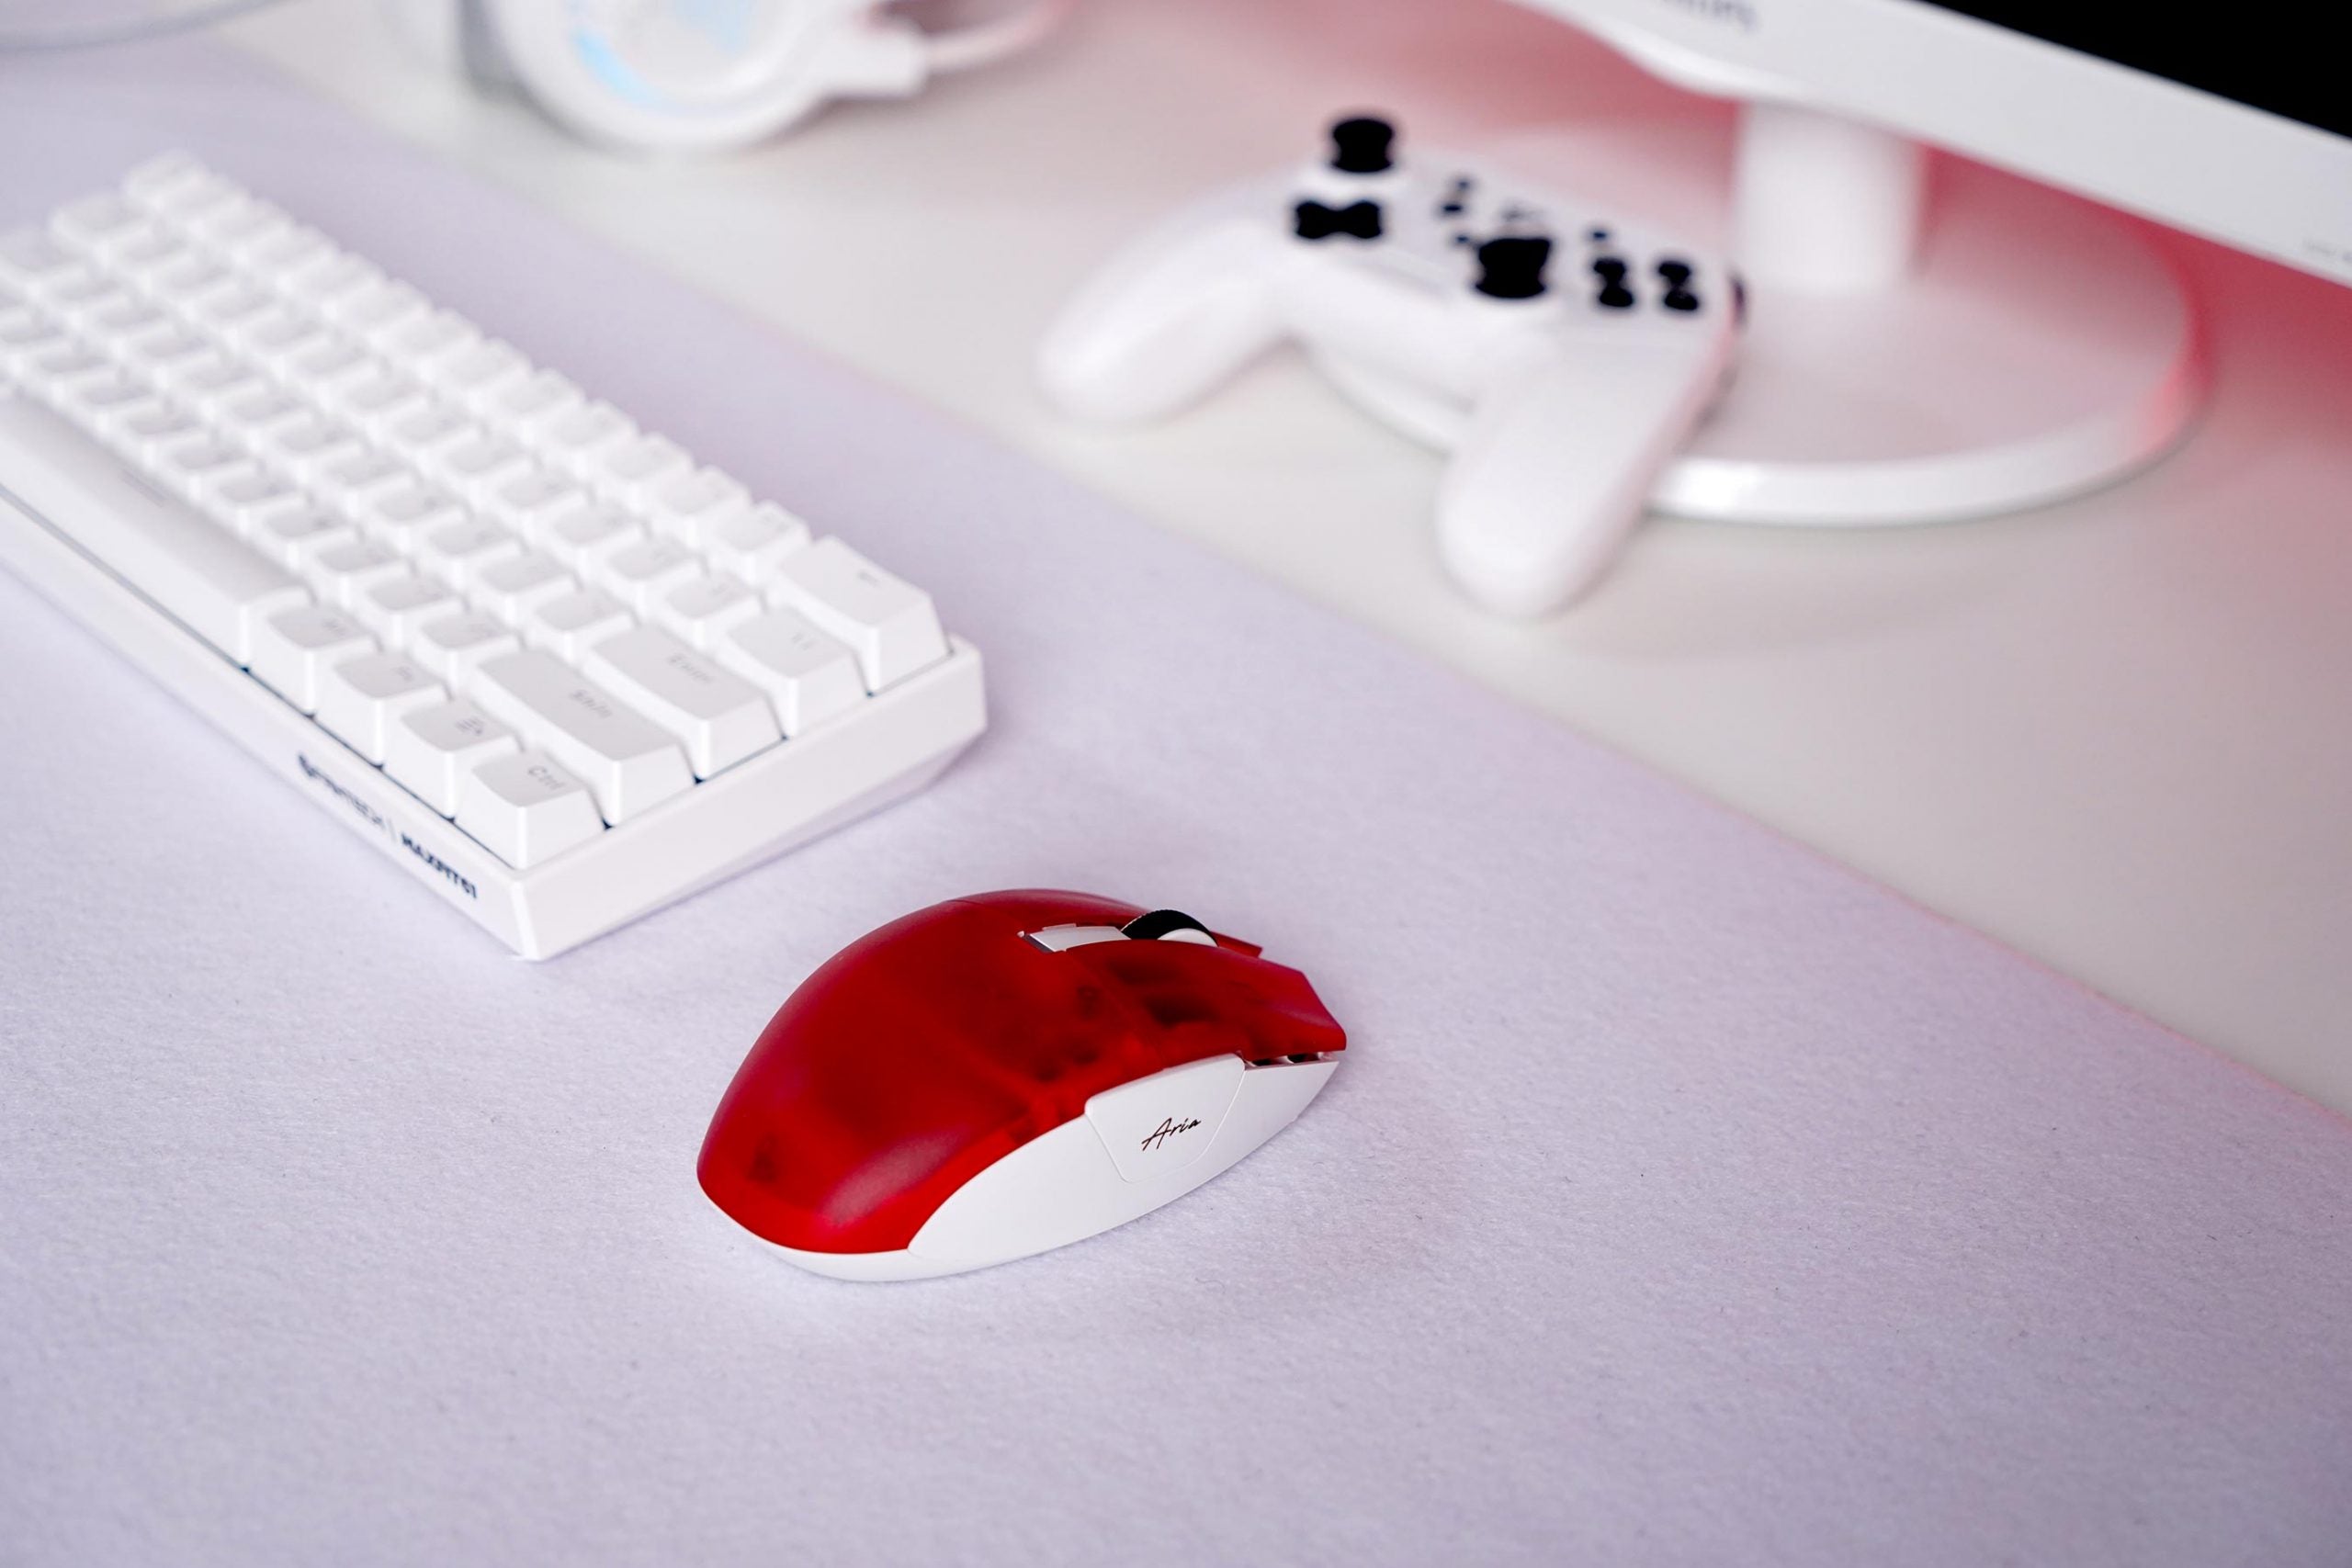 Best Gift Under $100 for Christmas - Fantech Aria Gaming Mouse